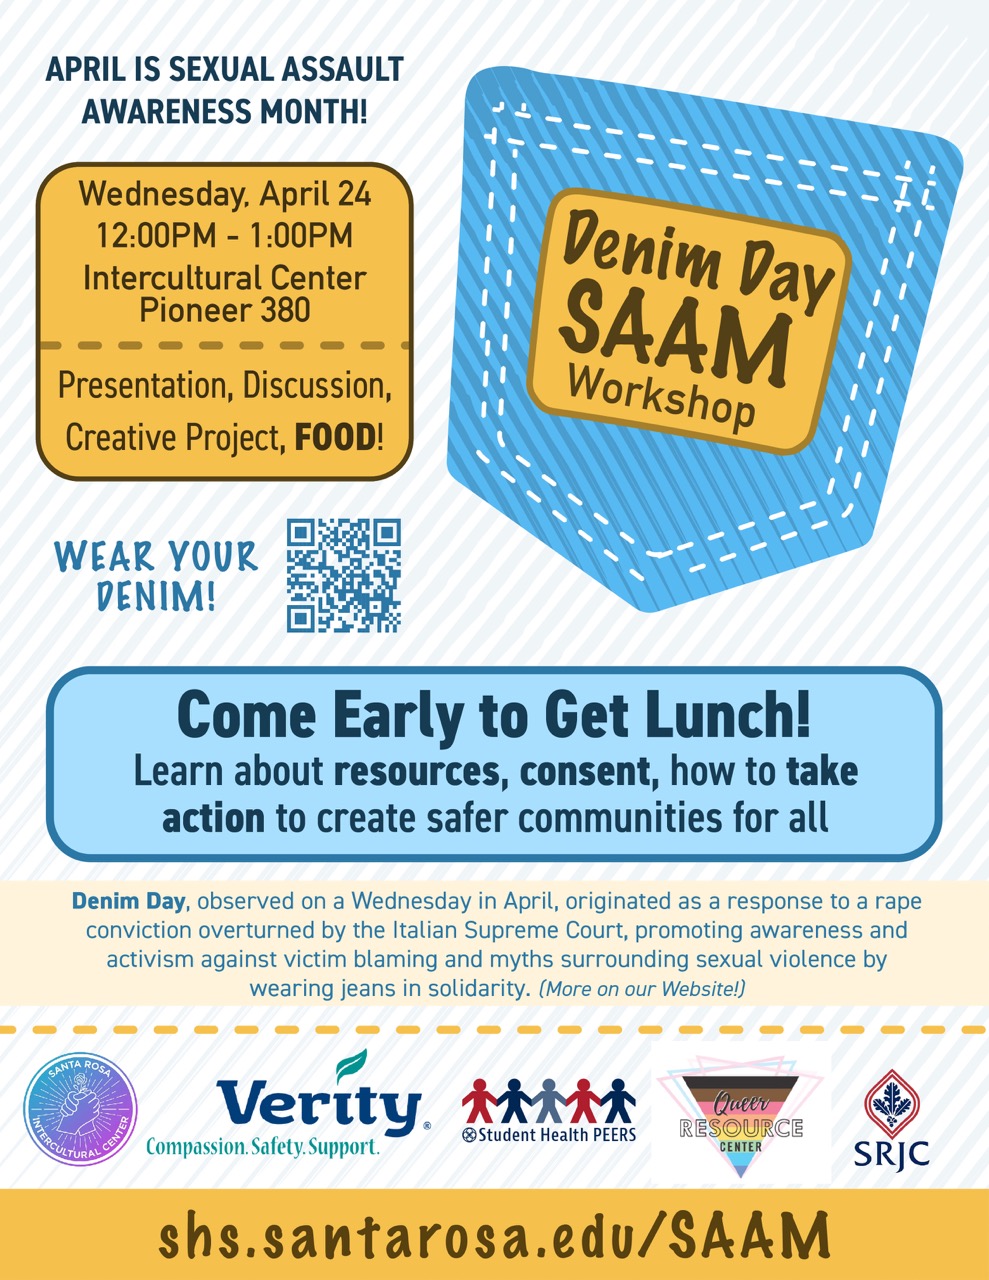 SAAM Workshop flyer featuring a denim pocket with a patch on it that reads Denim Day SAAM Workshop Wednesday, April 24. It notes: Learn about resources, consent, how to take action to create safer communities for all!